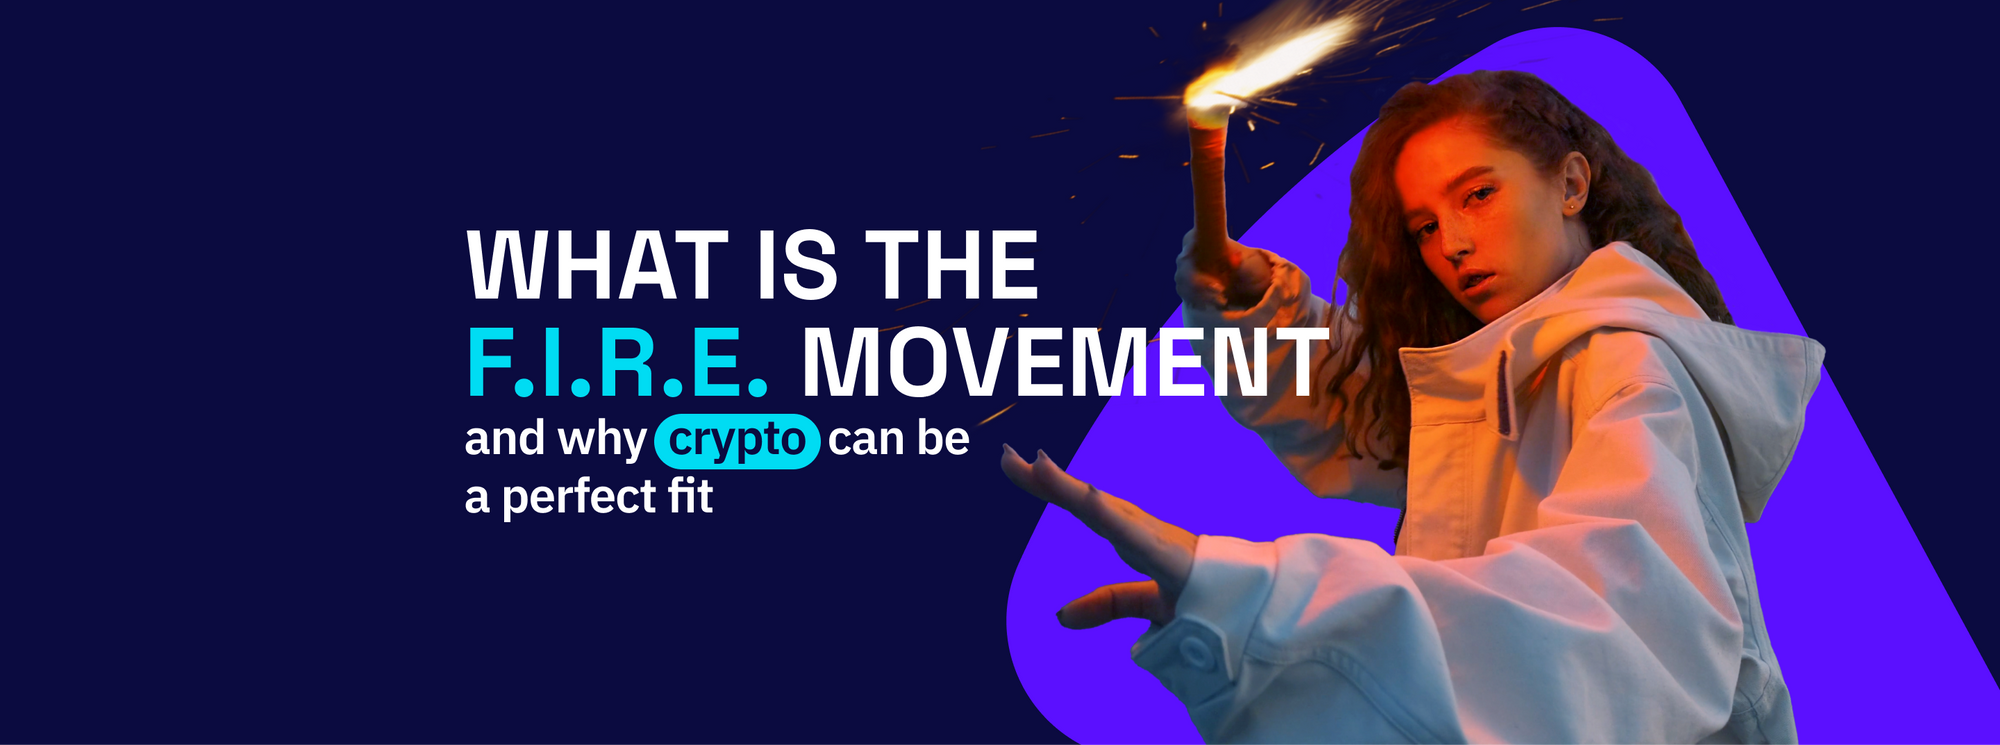 What is the F.I.R.E. movement and why crypto can be a perfect fit